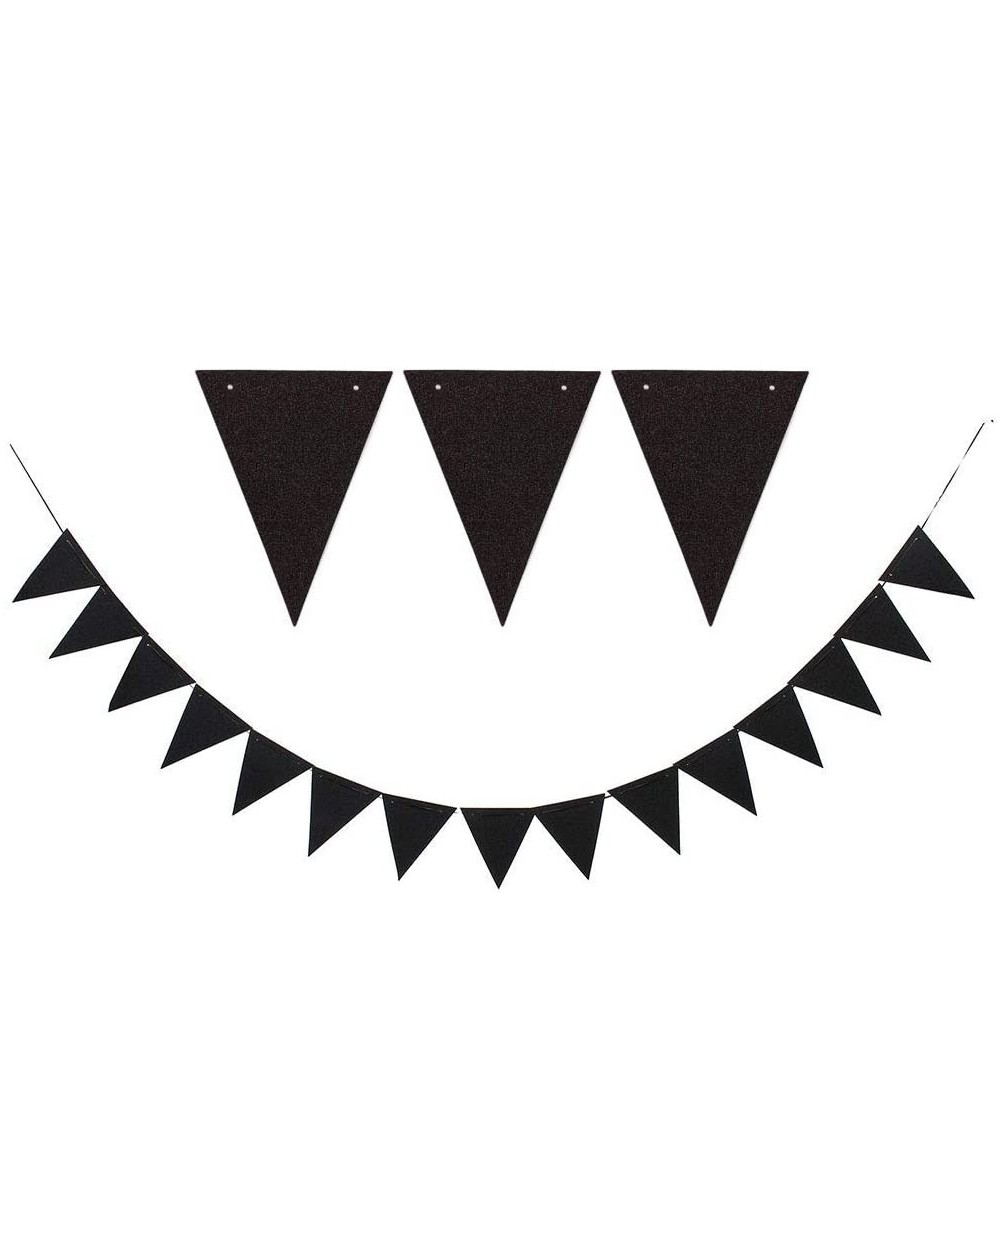 Banners & Garlands Black Pennant Banner Triangle Bunting Paper Flags-30pcs Flags- Pack of 1 - Black - CR18UNXKE57 $10.09